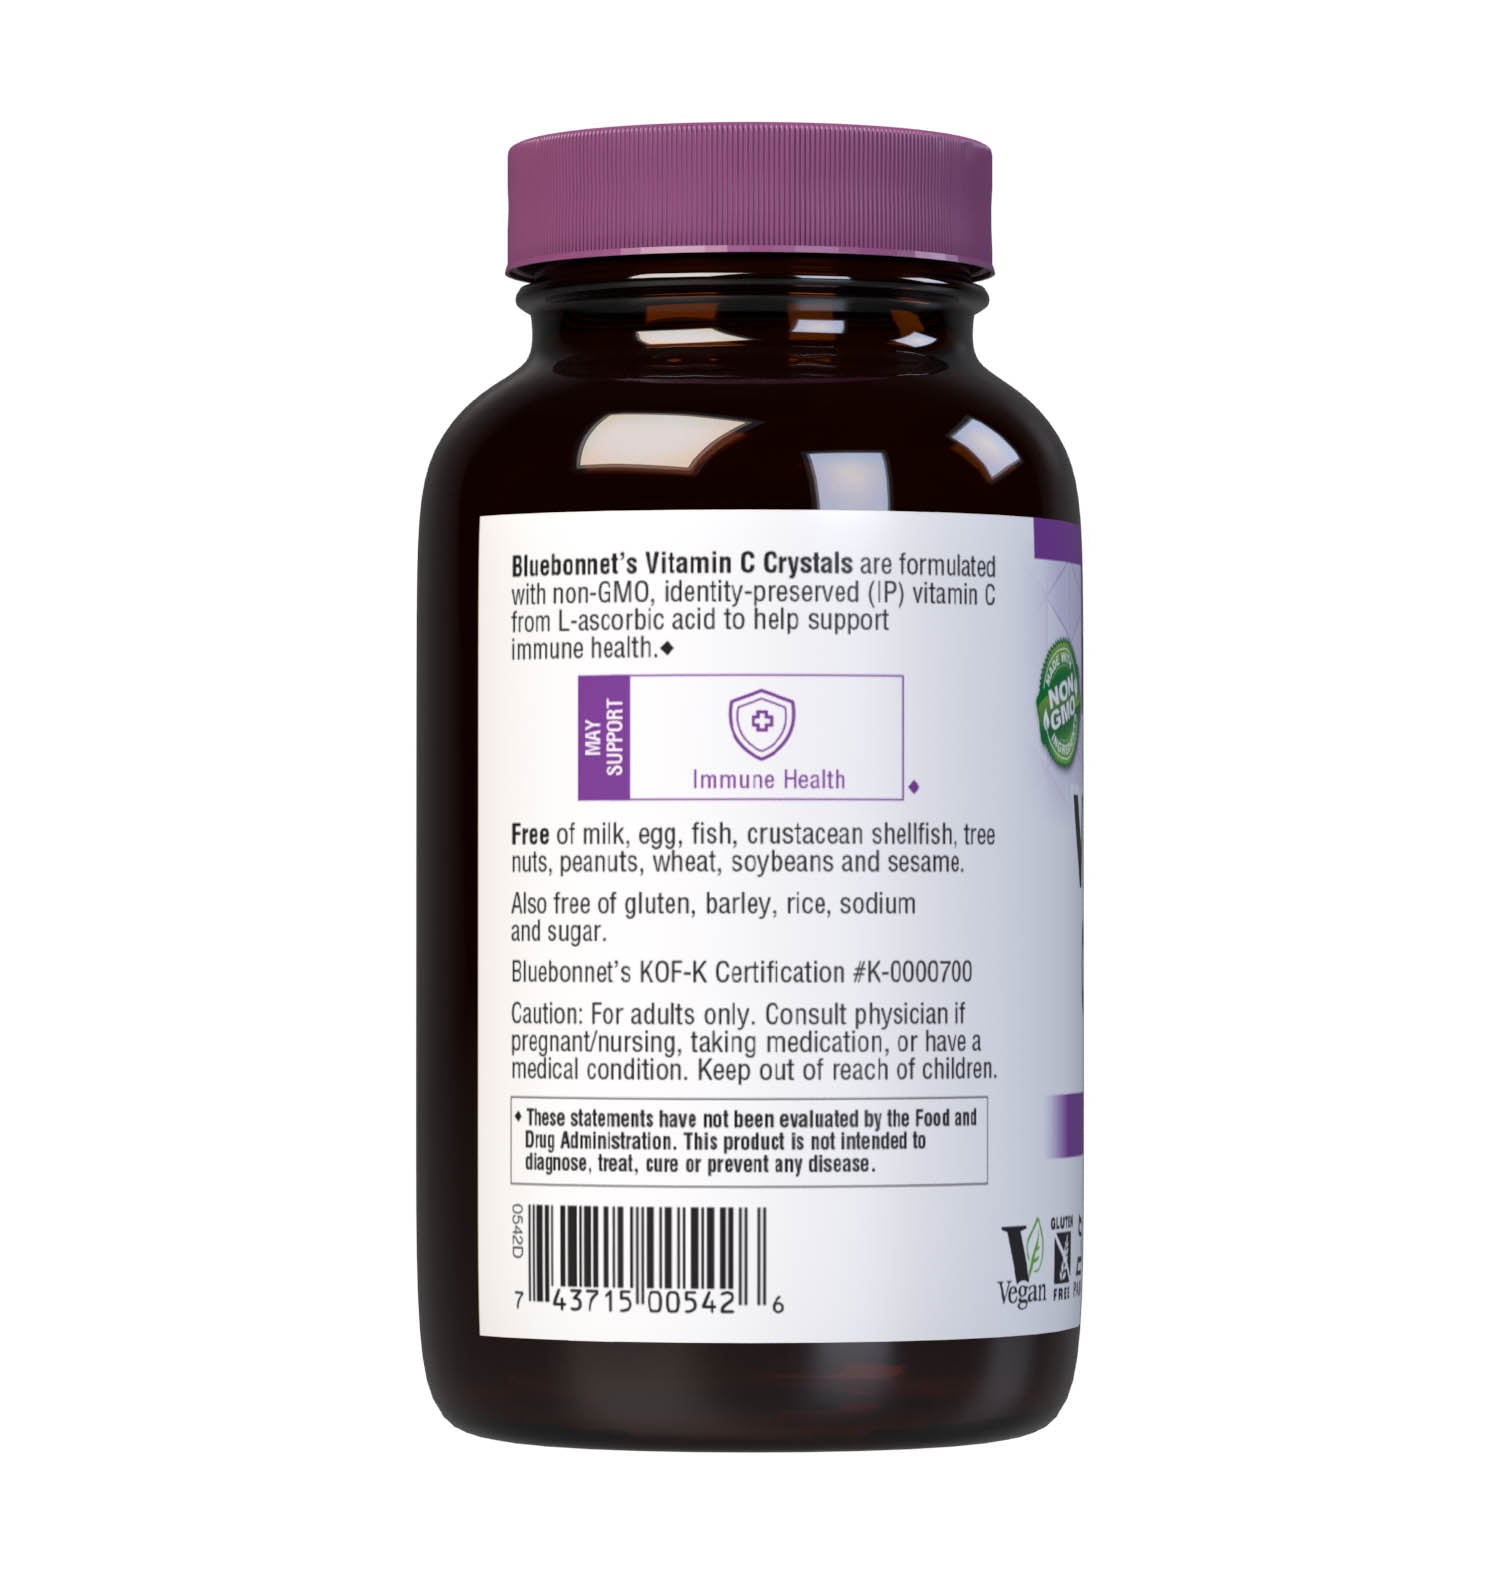 Bluebonnet’s Vitamin C Crystals are formulated with identity preserved (IP) L-ascorbic acid in its crystalline form to help support immune function. There are no excipients present. Description panel. #size_8.8oz